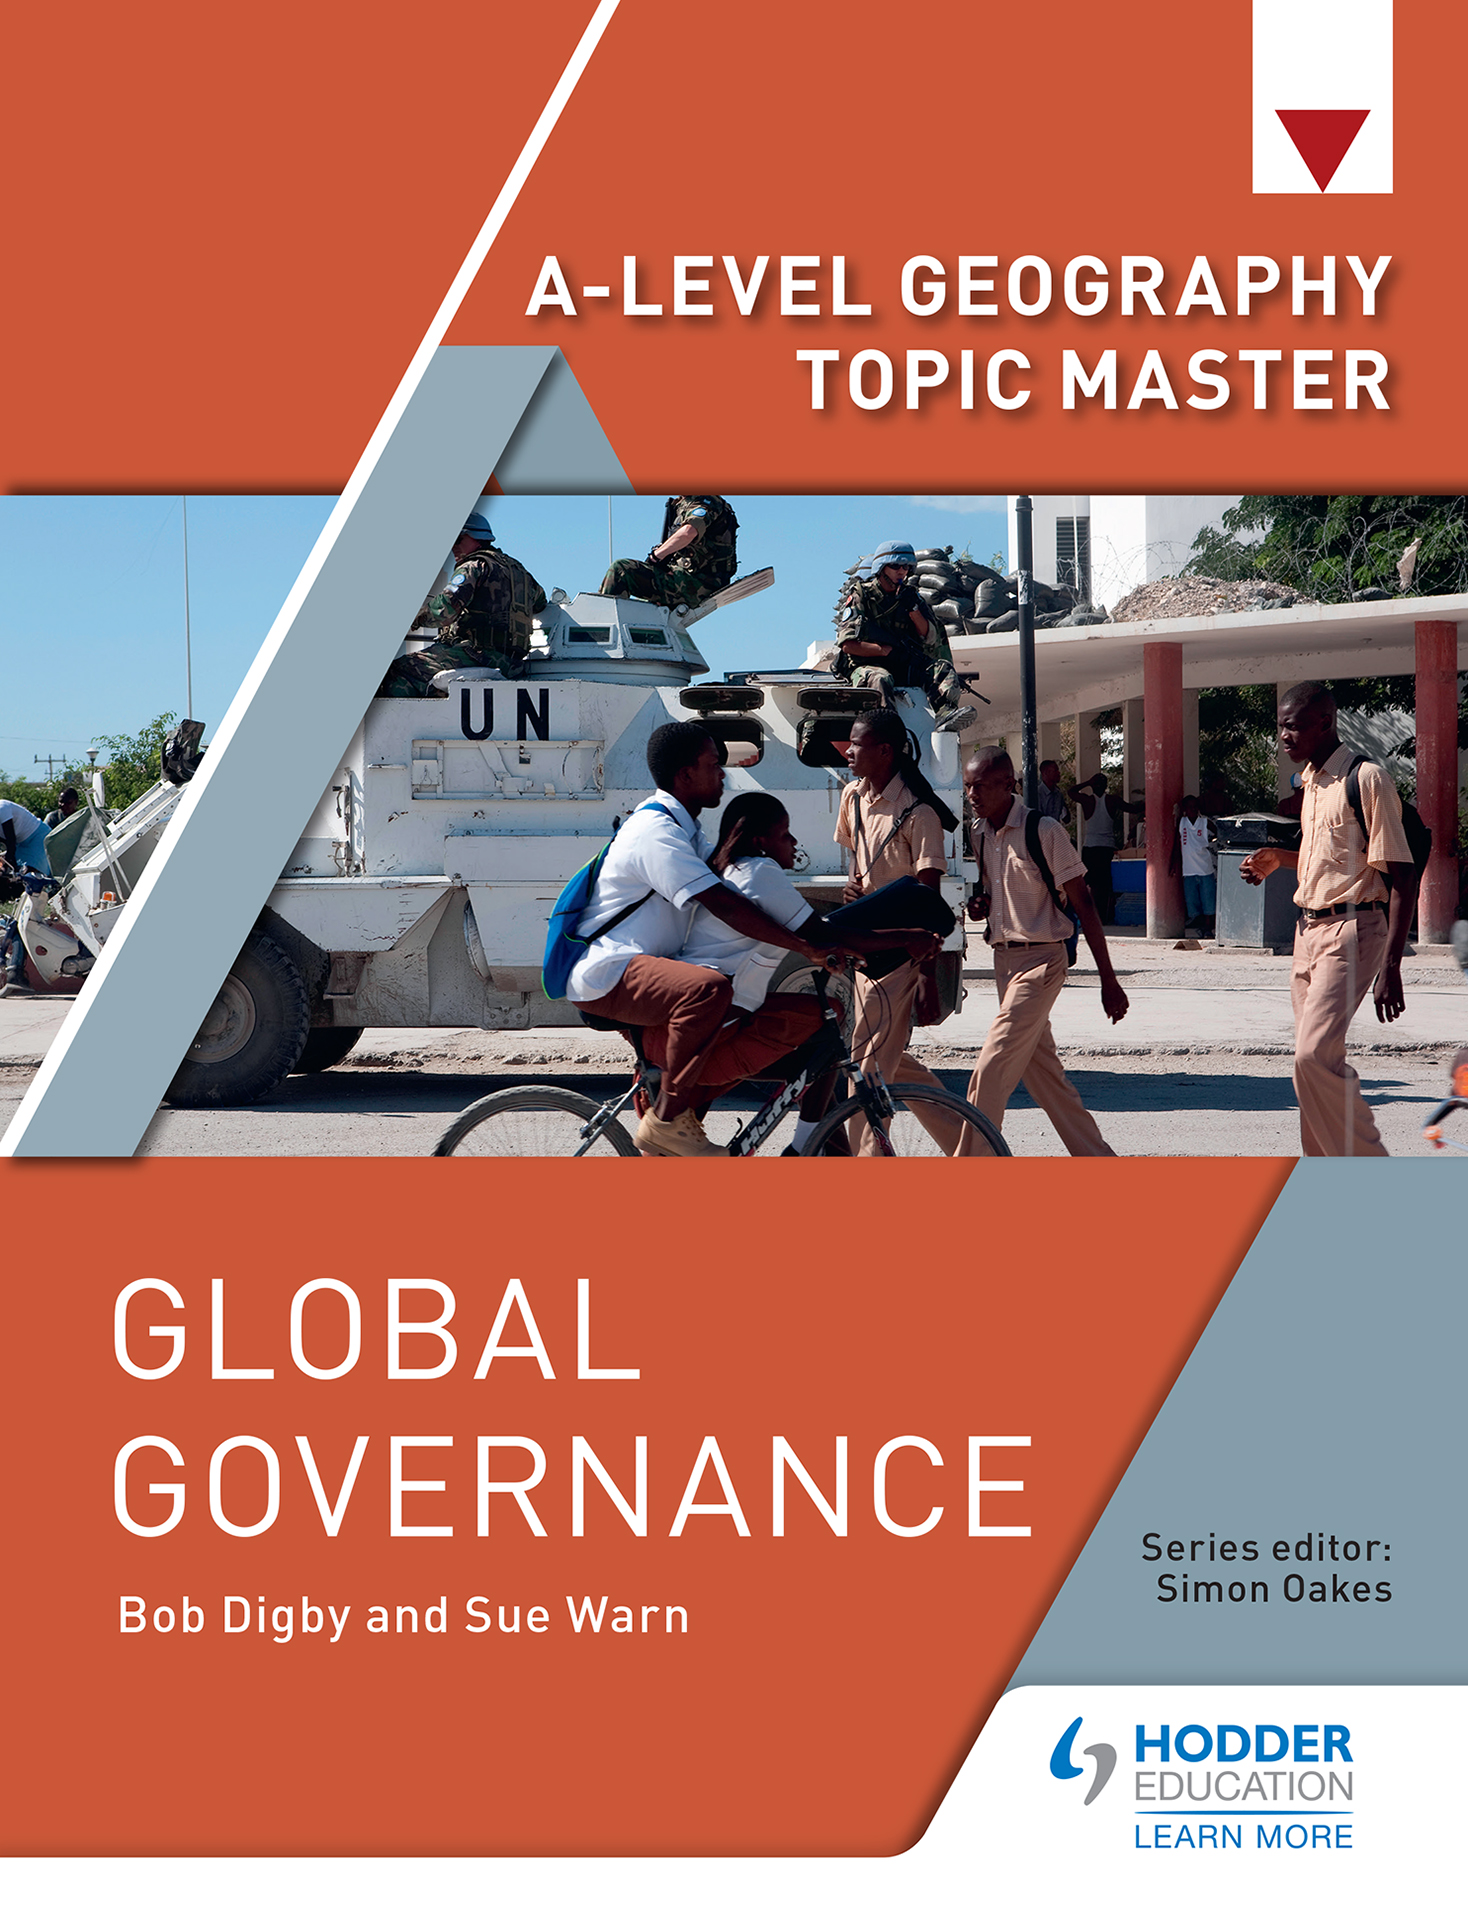 A-level Geography Topic Master: Global Governance